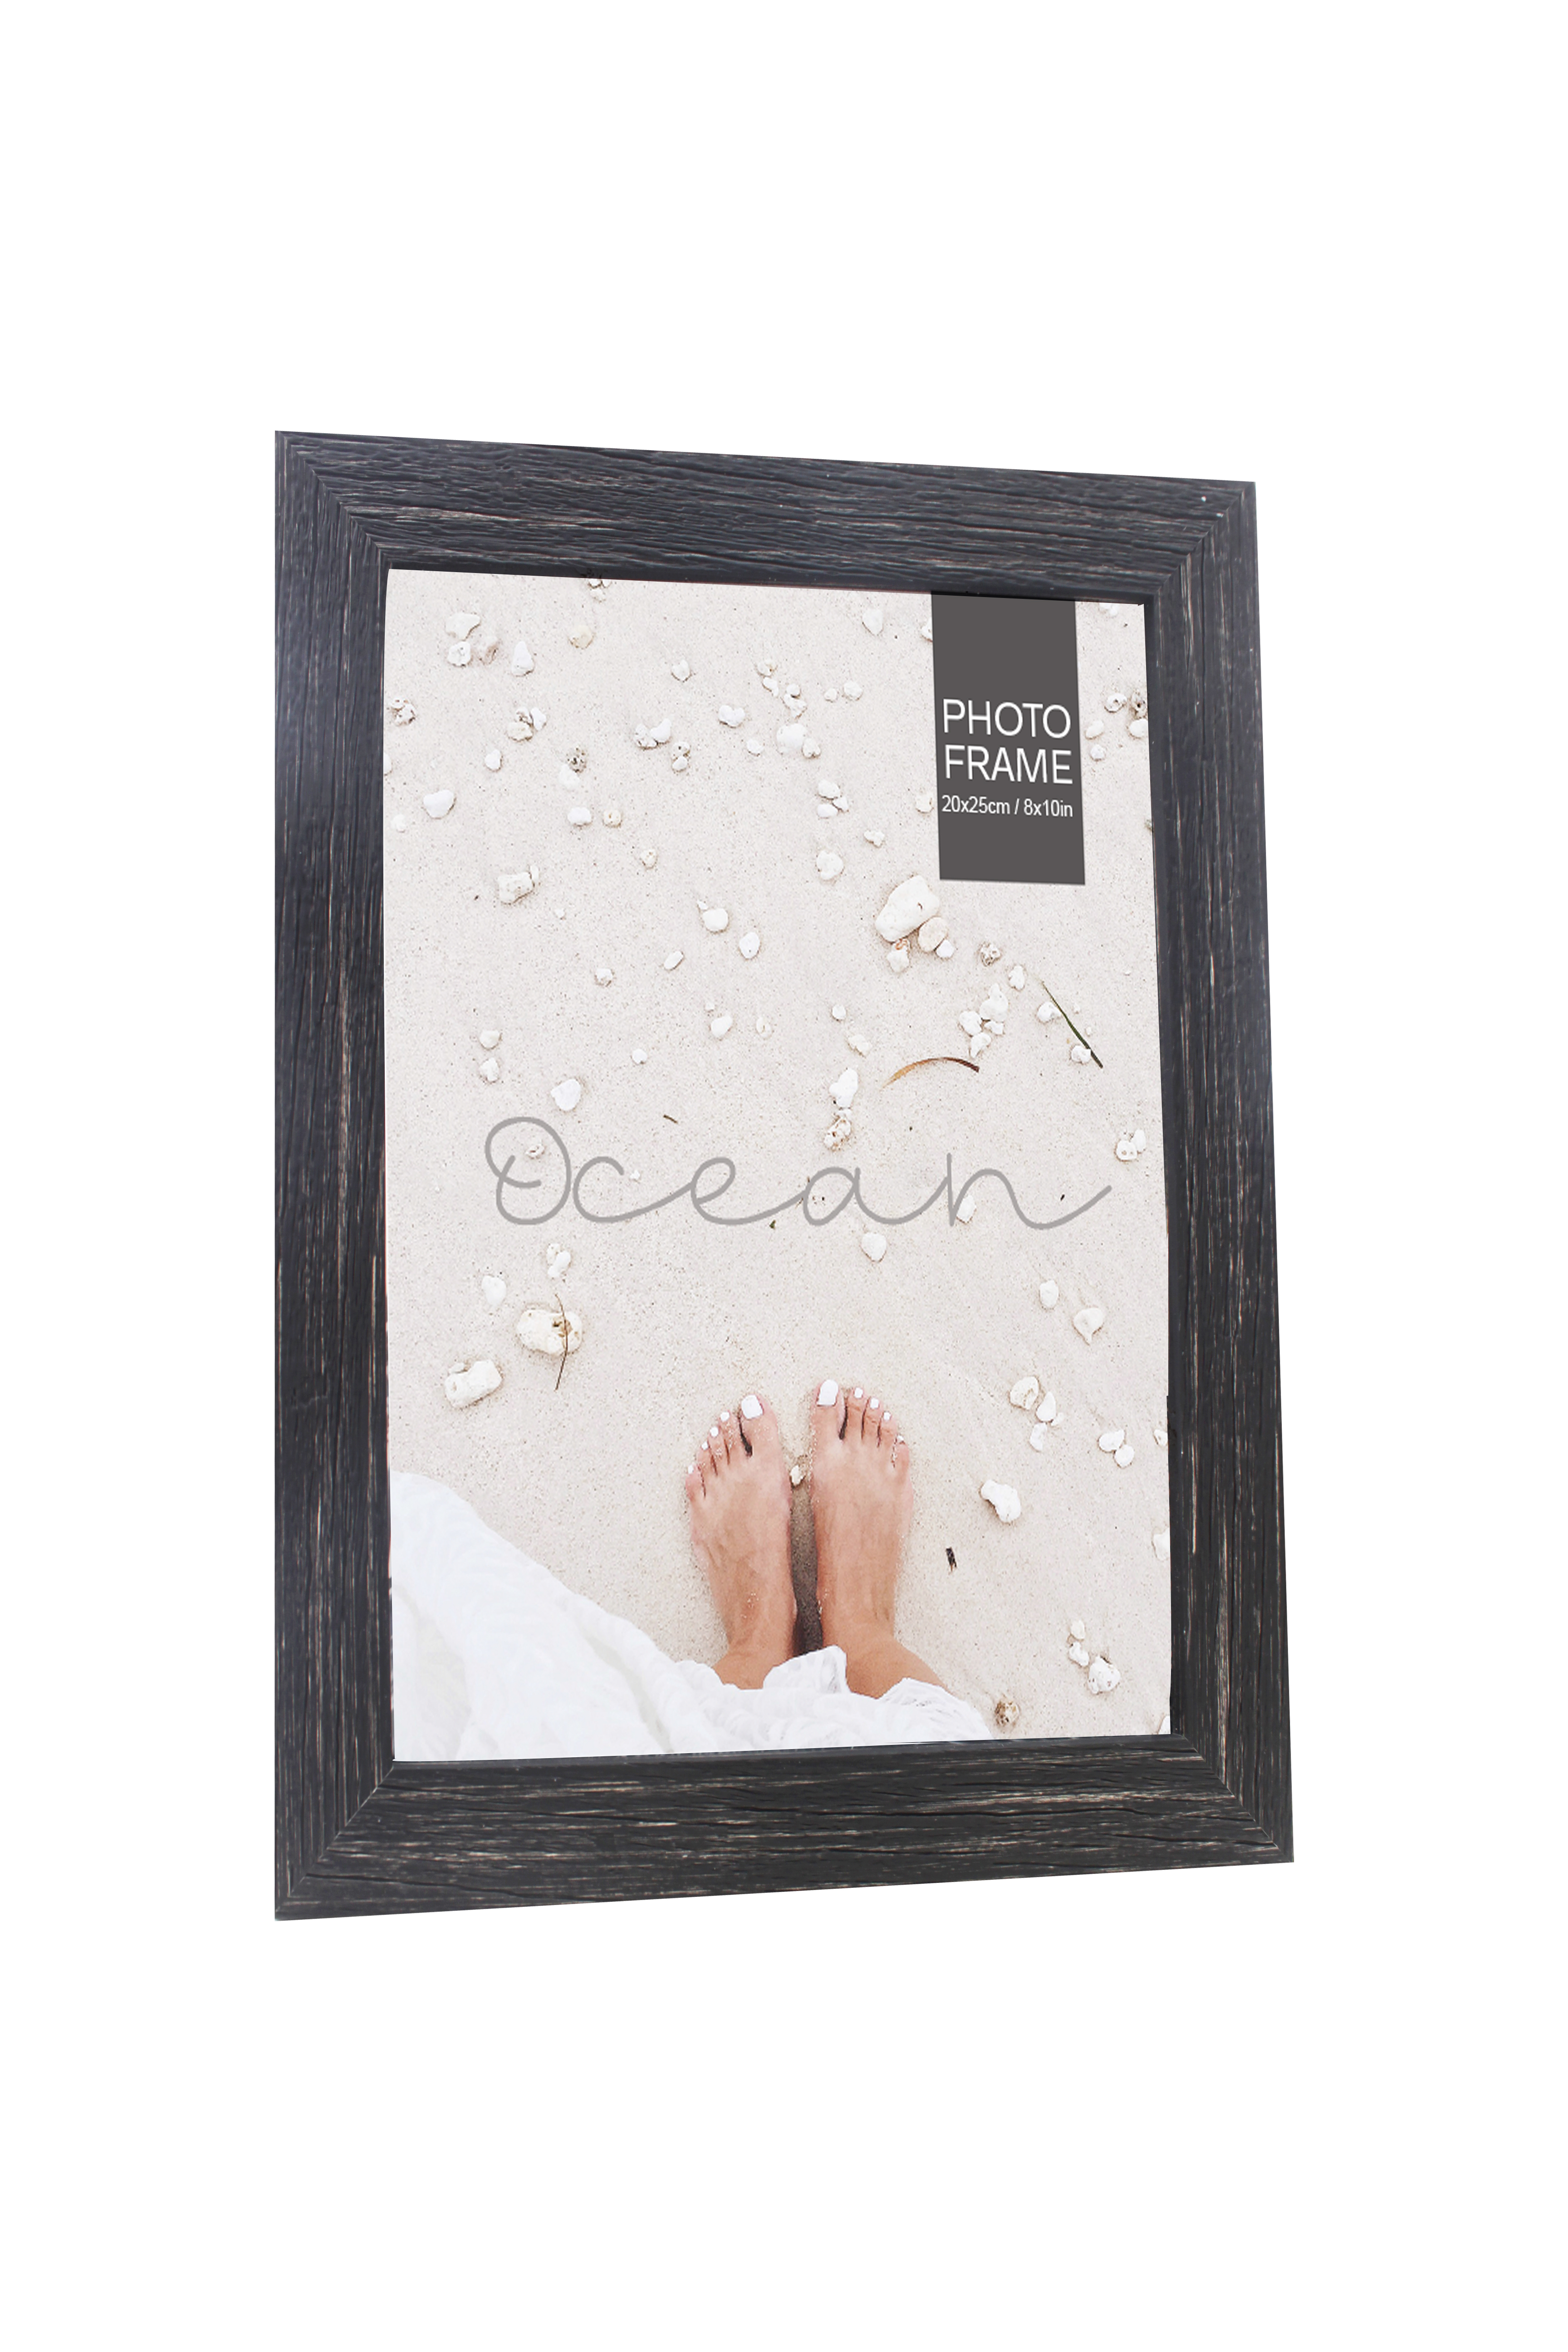 PHOTO FRAME 20 X 25CM ASSORTED COLORS